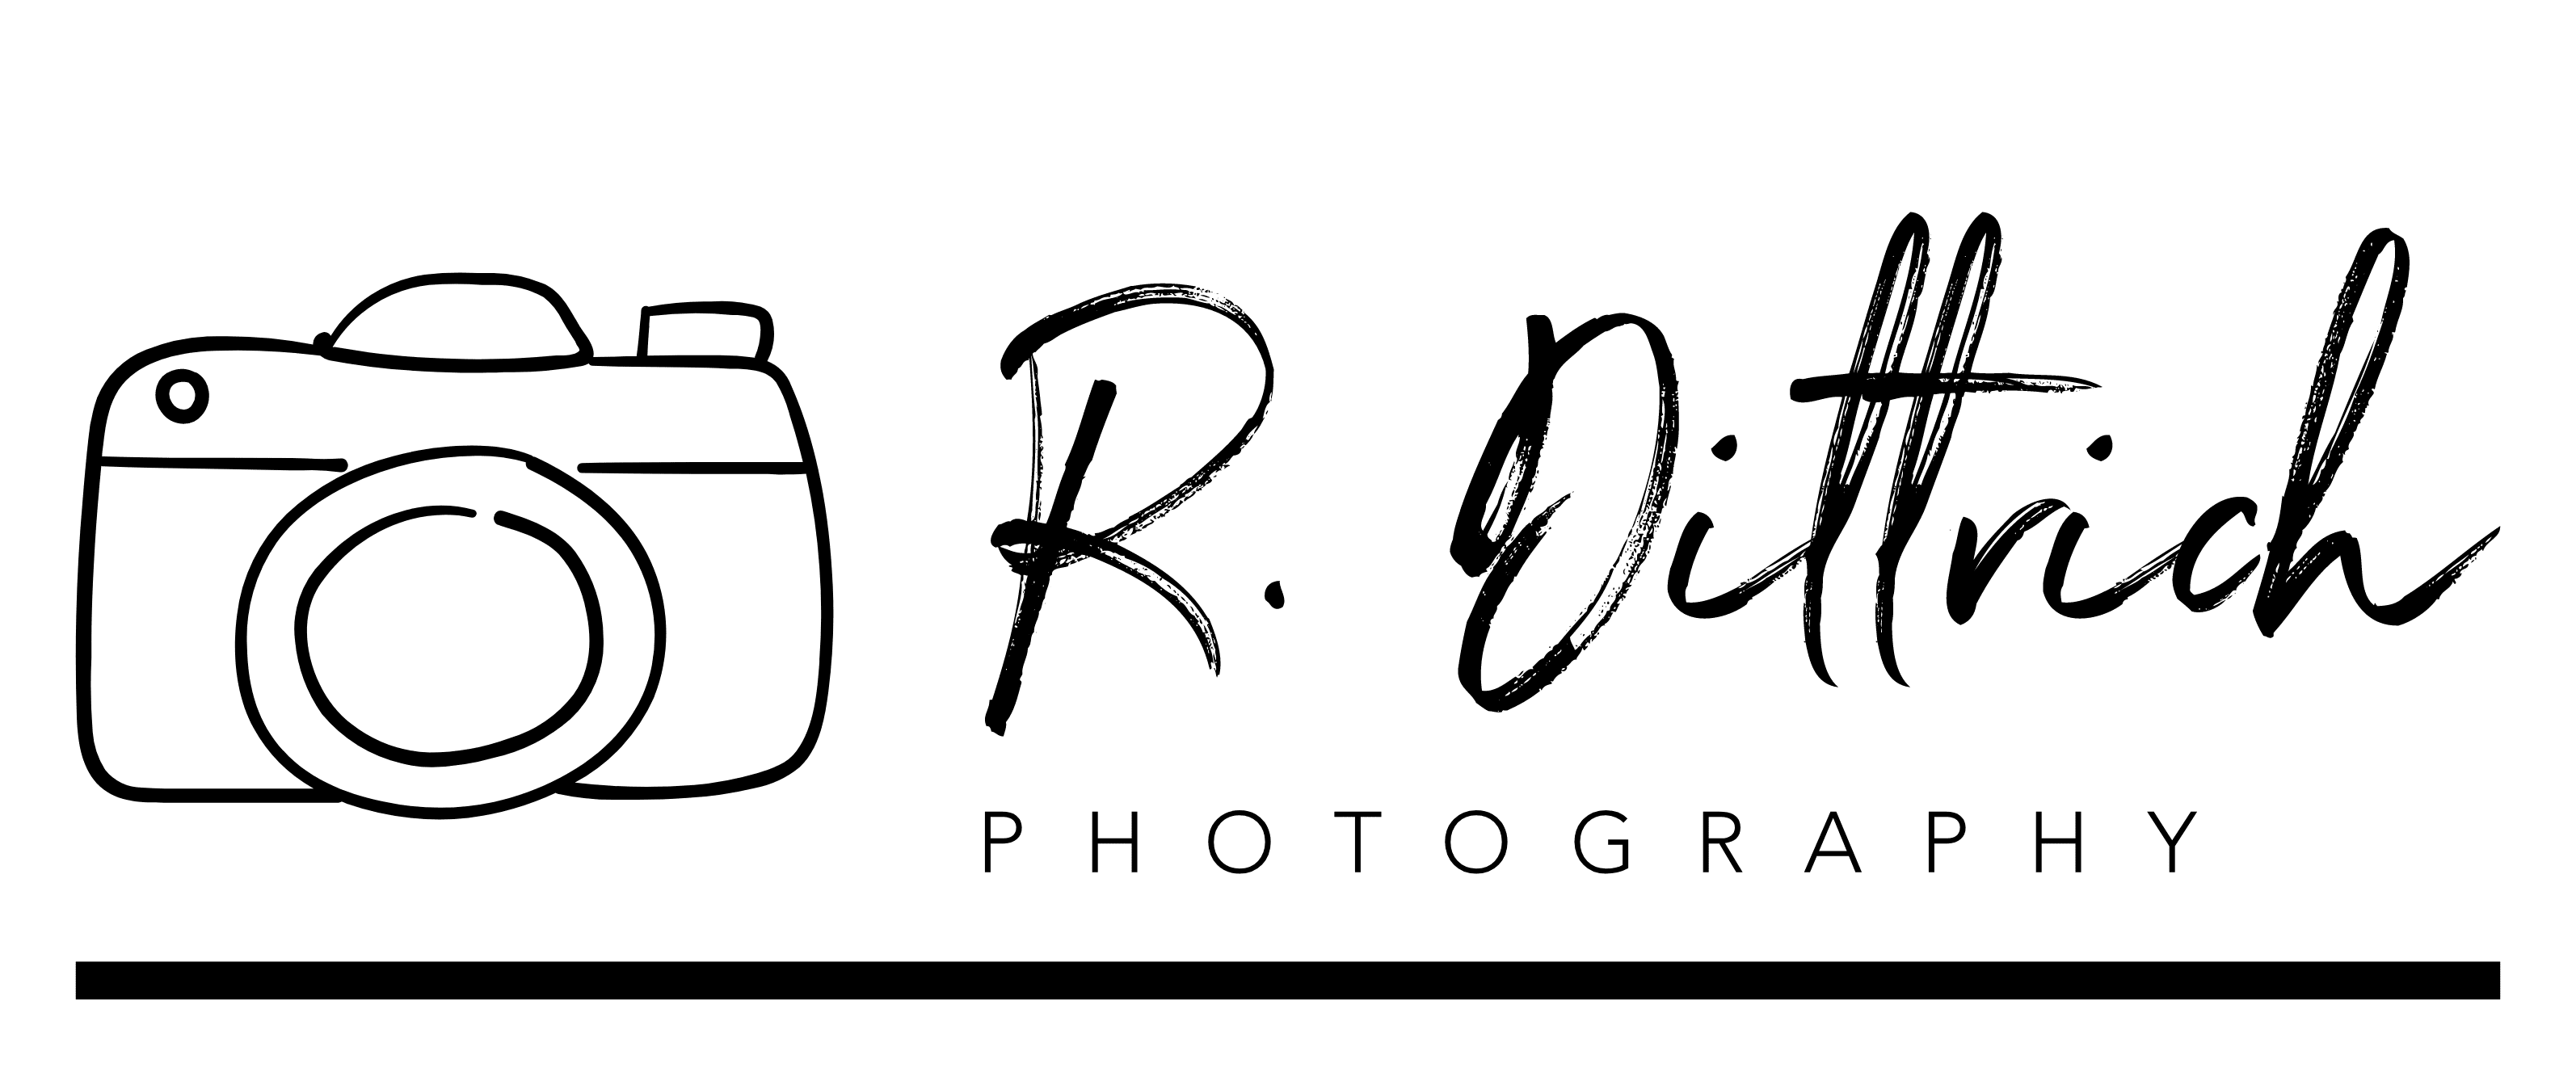 R Dittrich Photography